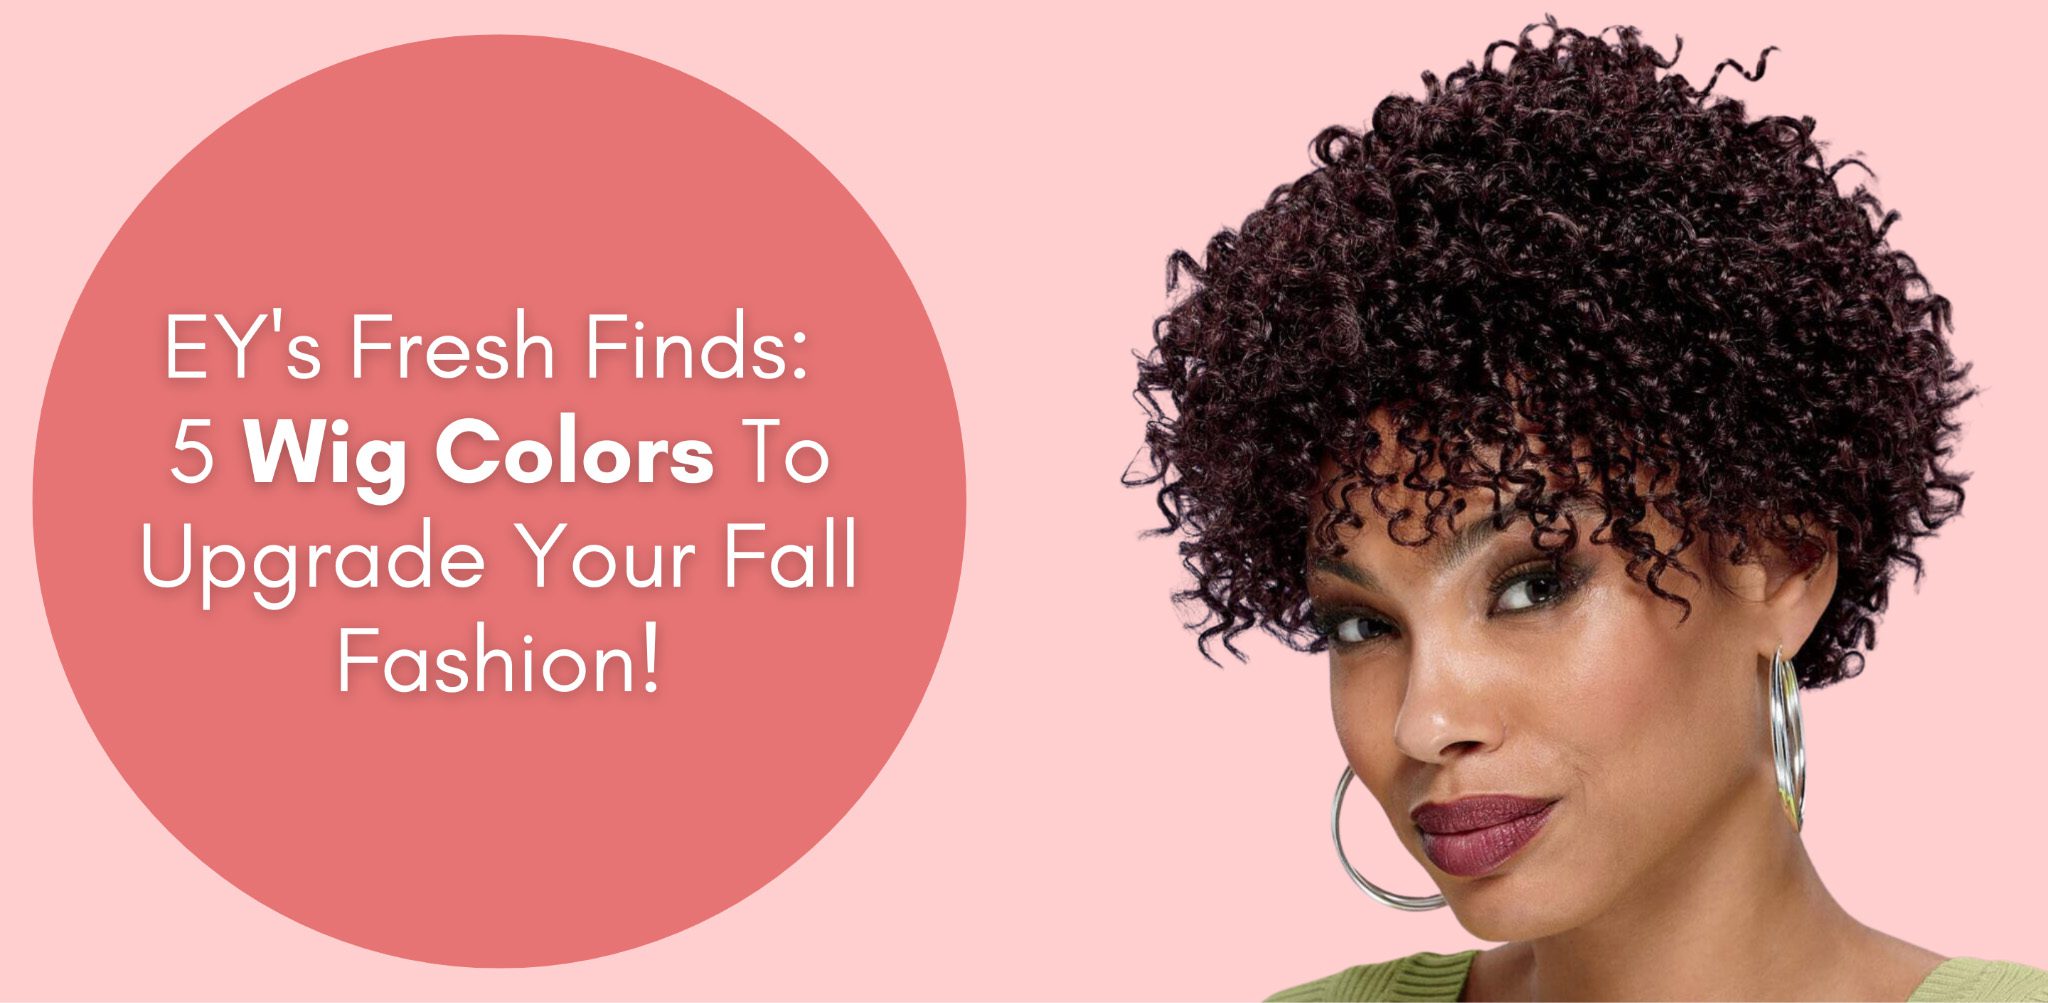 eys fresh finds 5 wig colors to upgrade your fall fashion